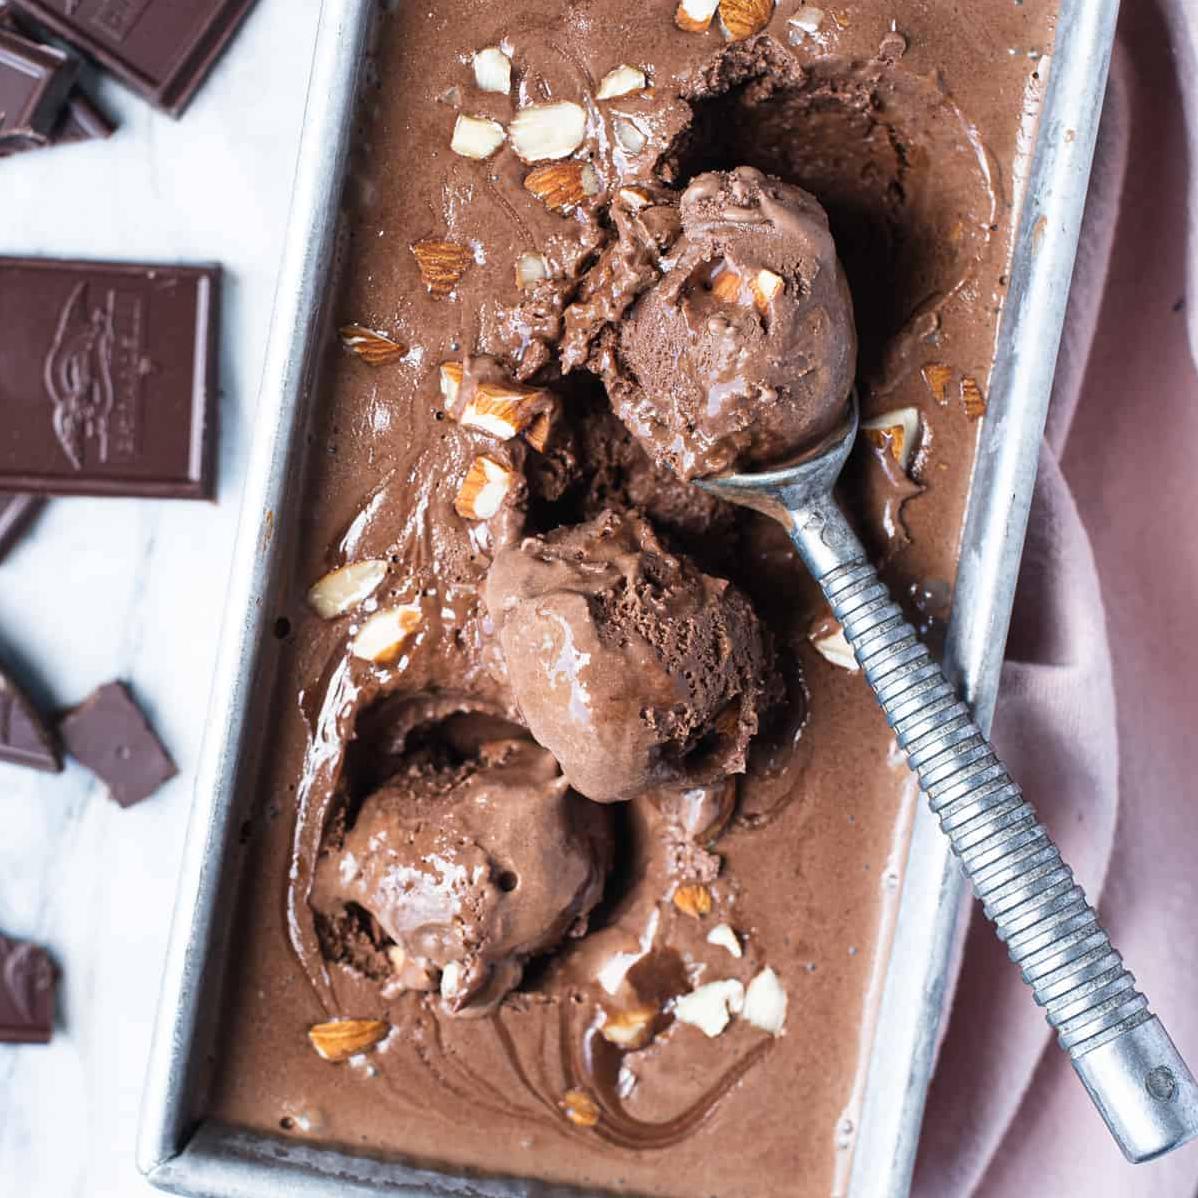  Indulge in the rich flavors of this decadent ice cream recipe.